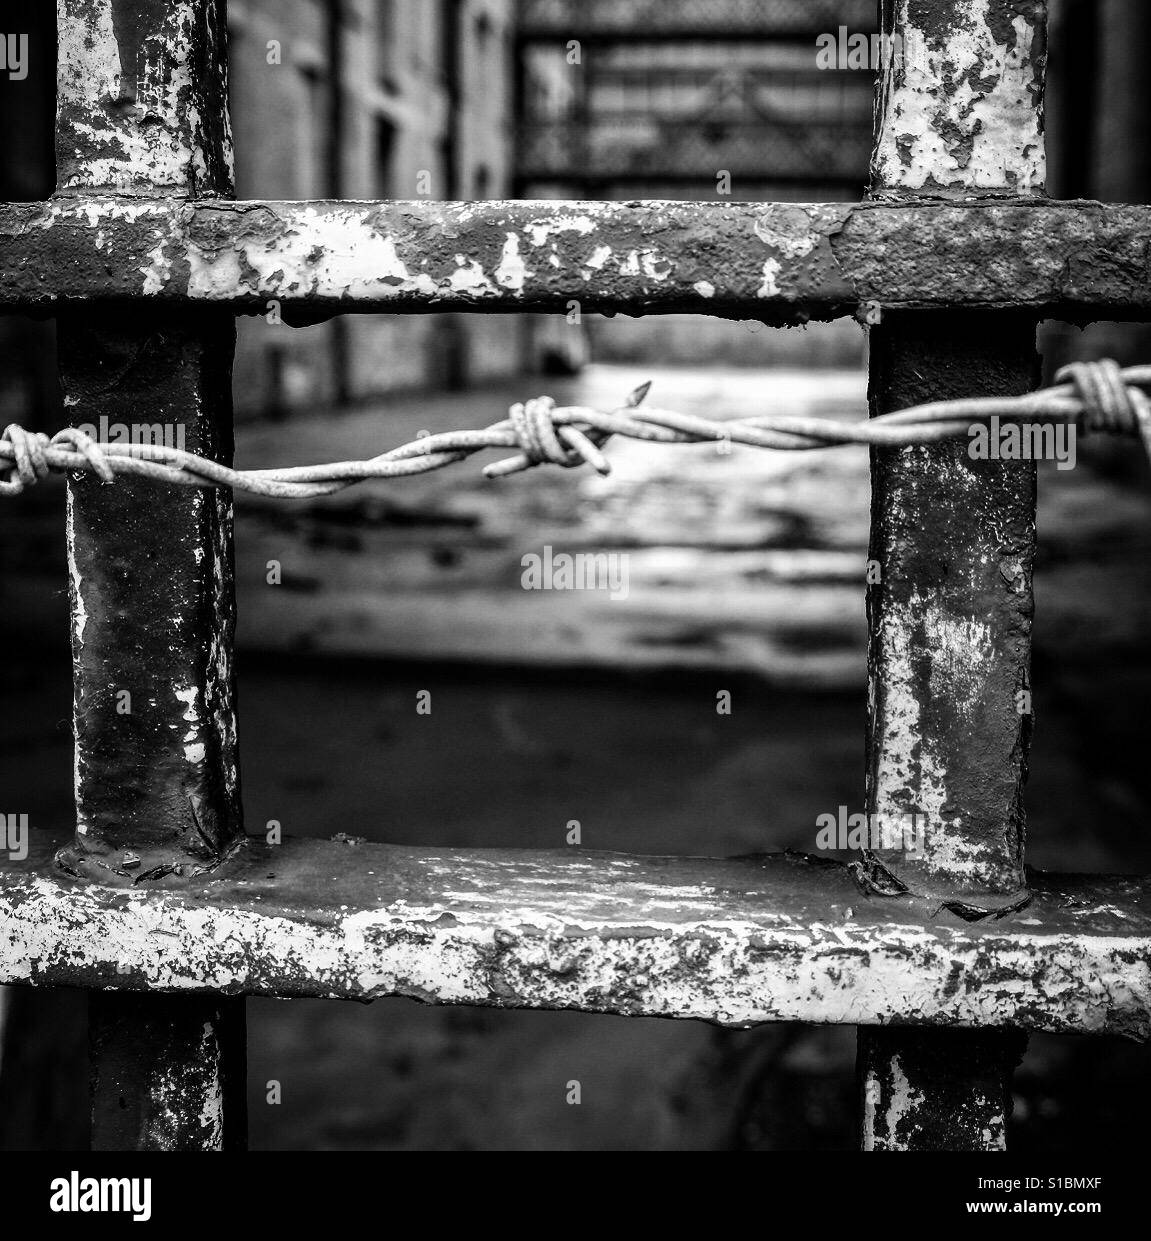 Urban decay barbed wired gate. Stock Photo